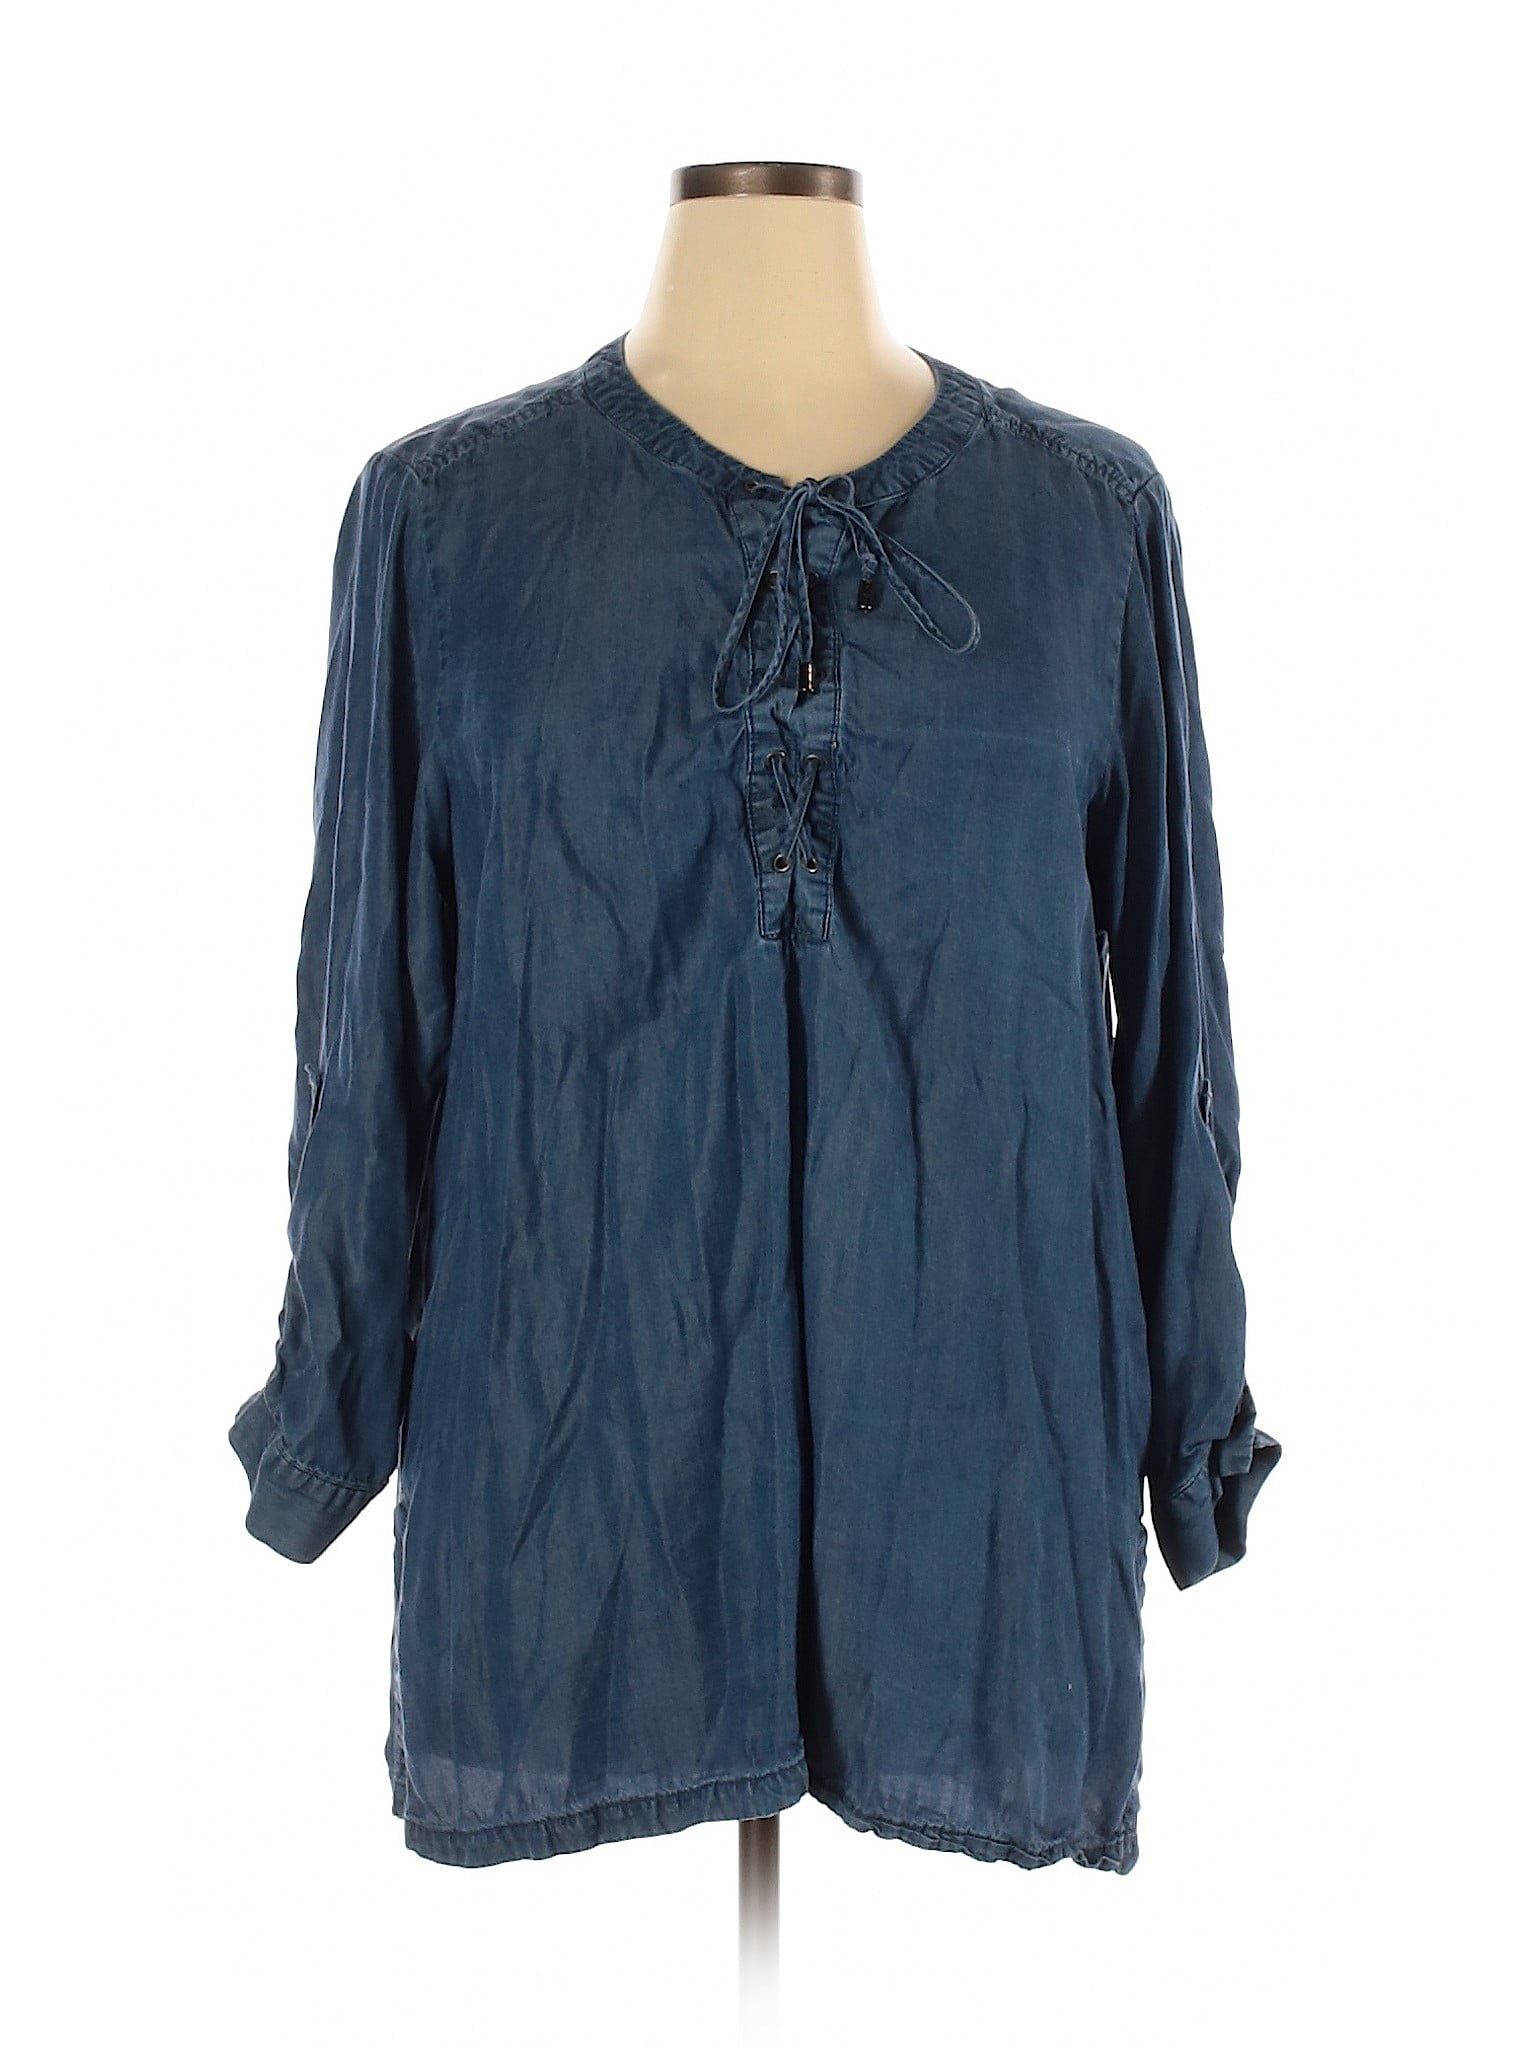 Jane and Delancey - Pre-Owned Jane and Delancey Women's Size 1X Plus ...